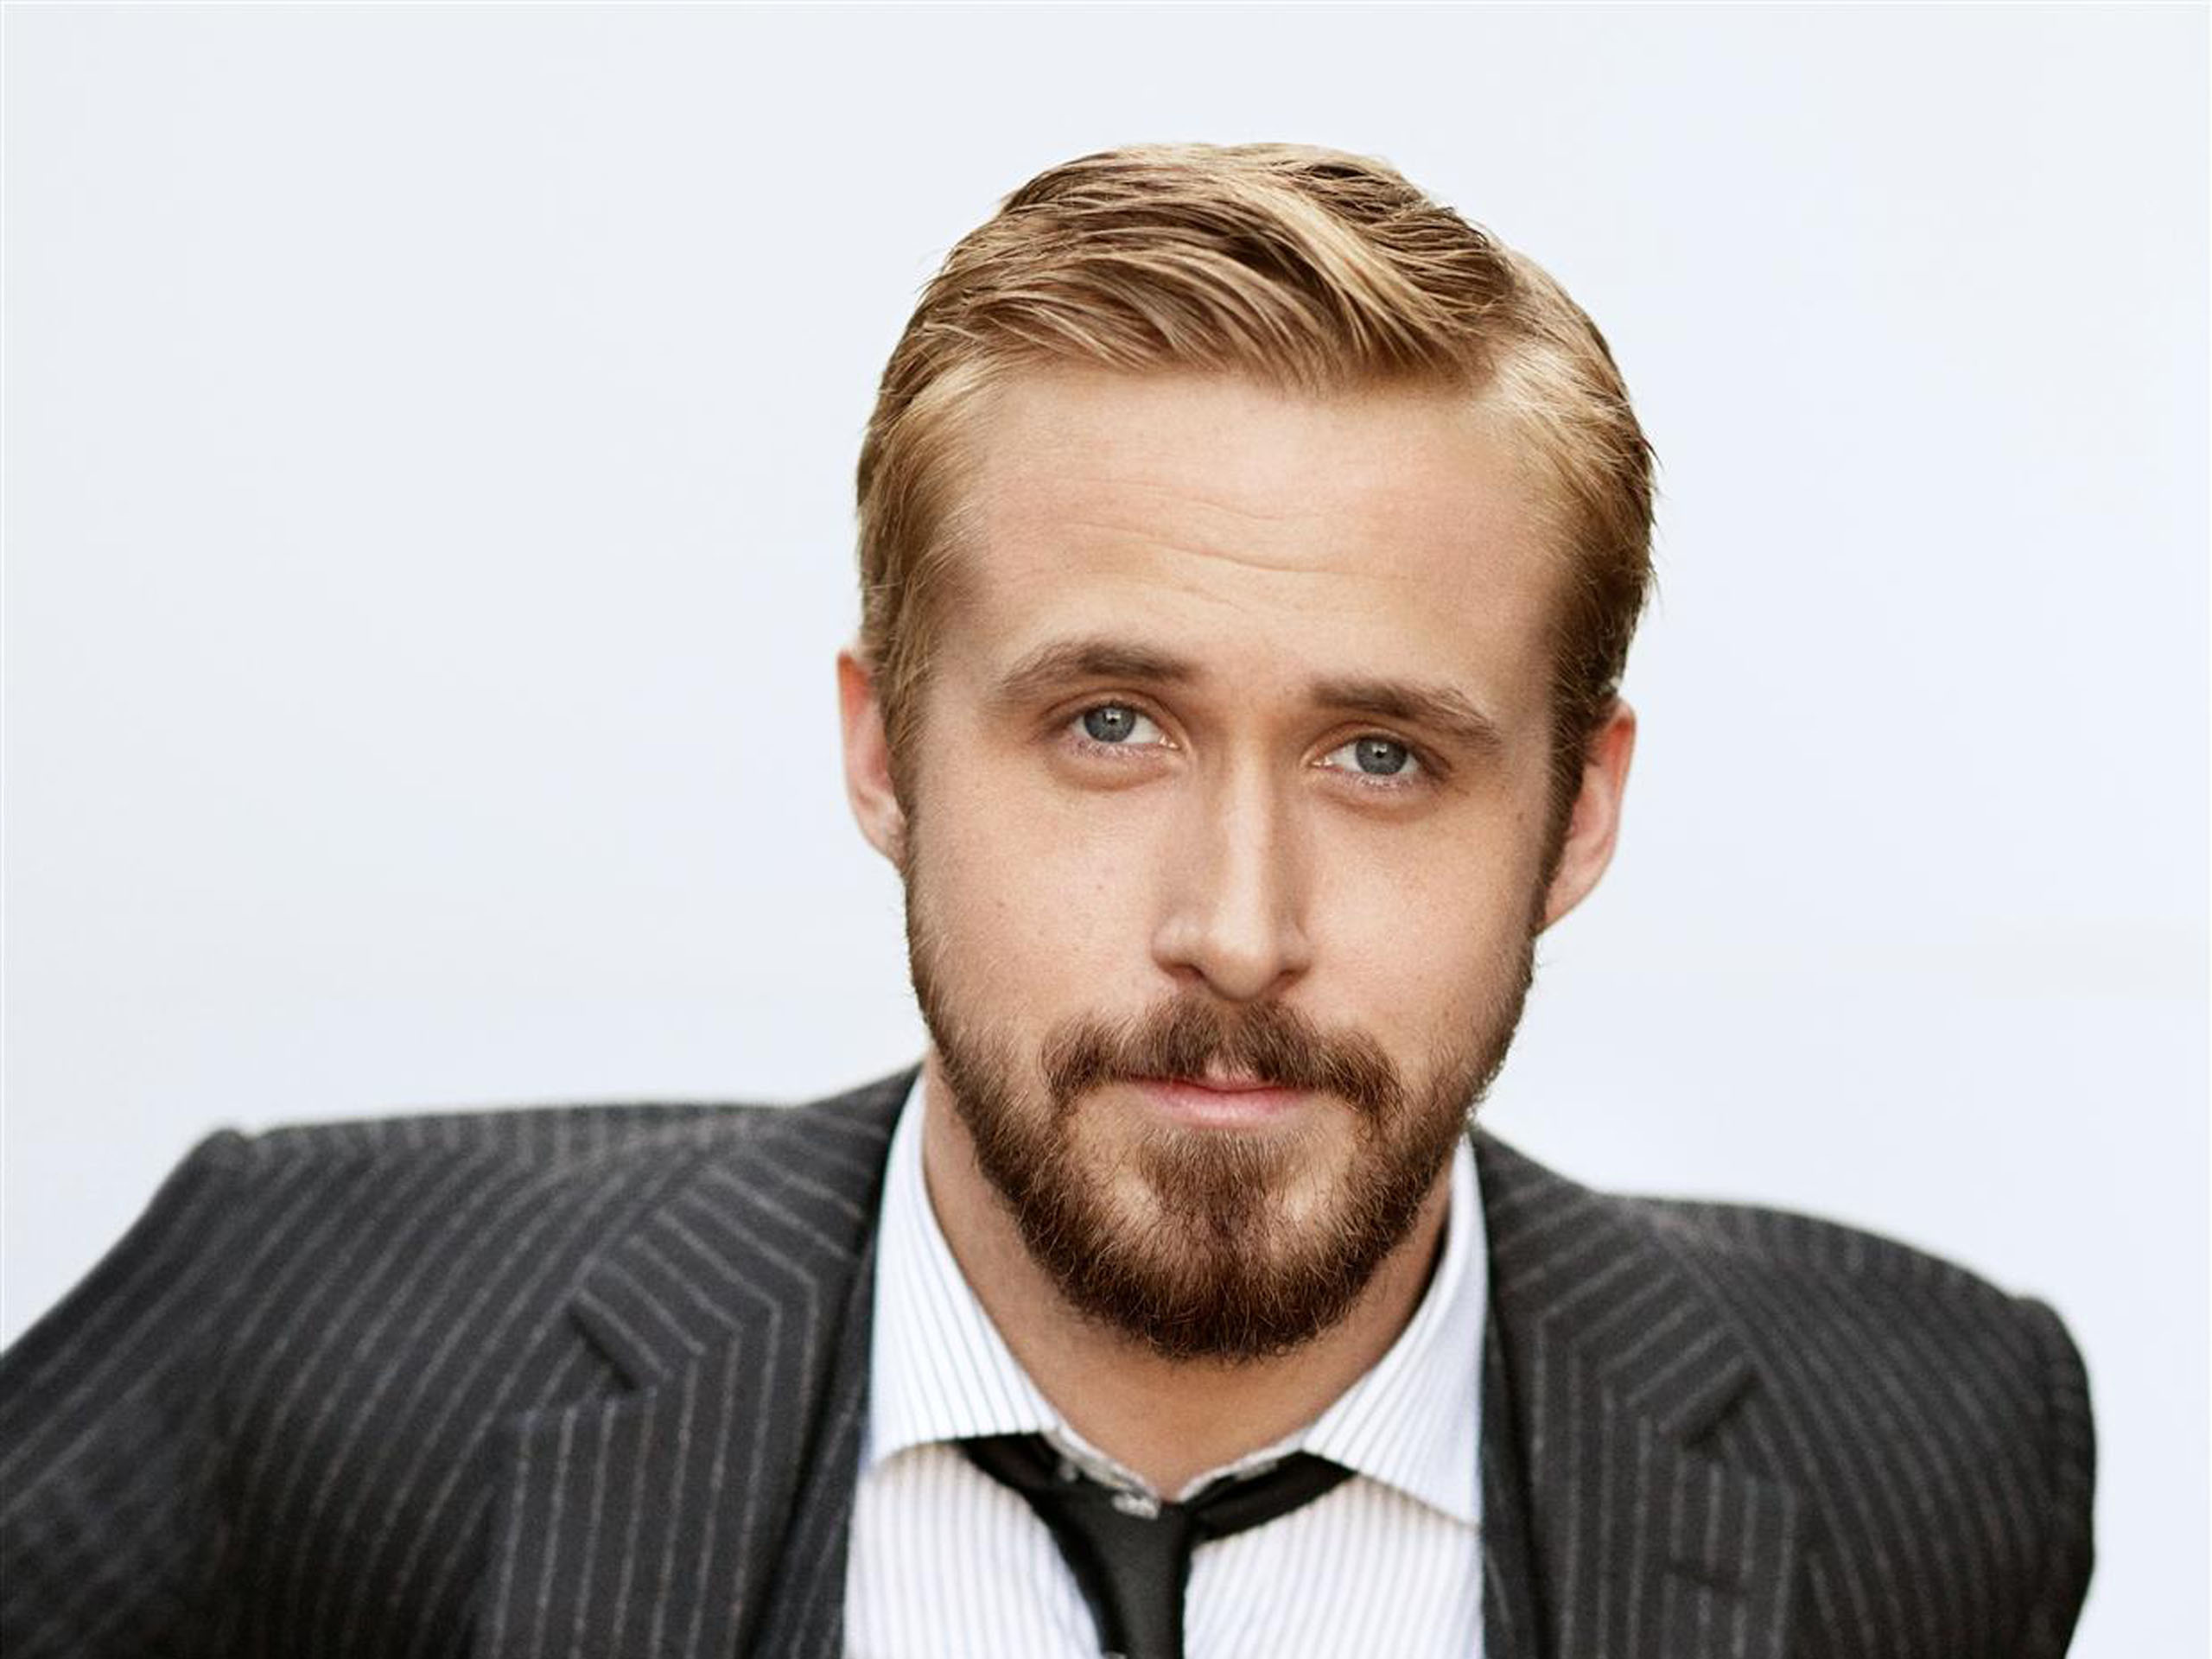 7. "The Ryan Gosling Haircut: A Classic Look for Men" - wide 6